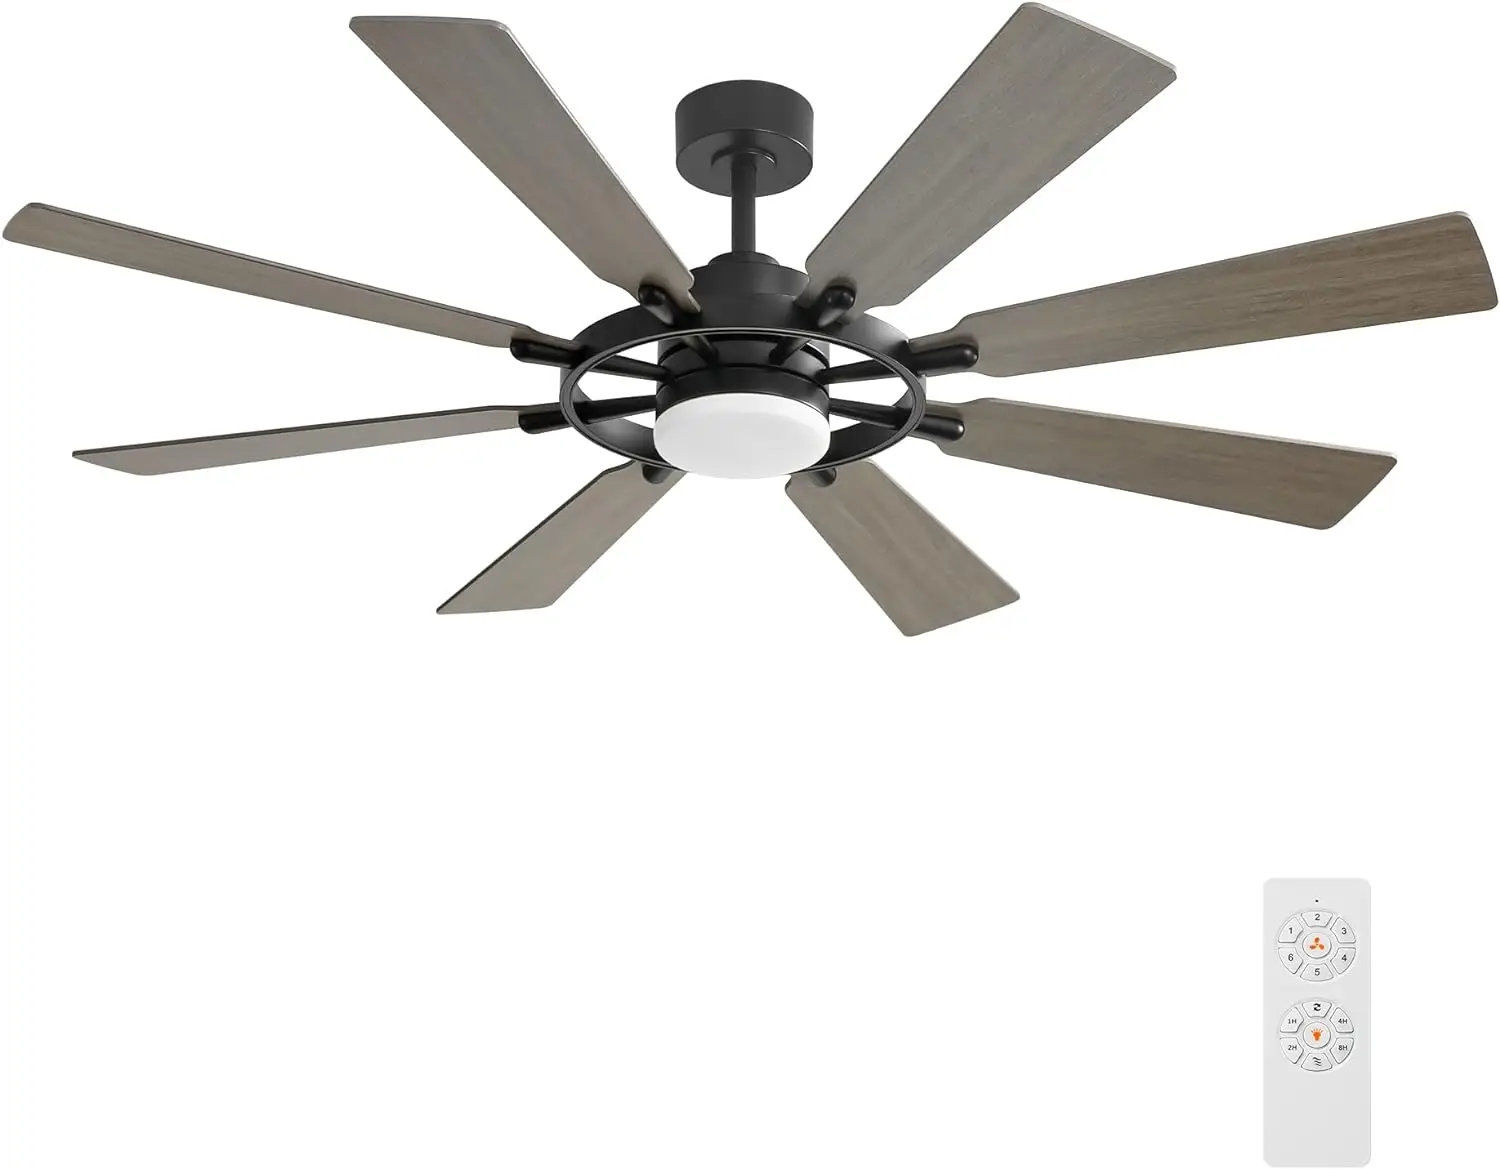 60 Inch Ceiling Fan with Lights and Remote Control, Wood 8 Blades 6-Speed Noiseless Reversible DC Motor, Modern Farmhouse